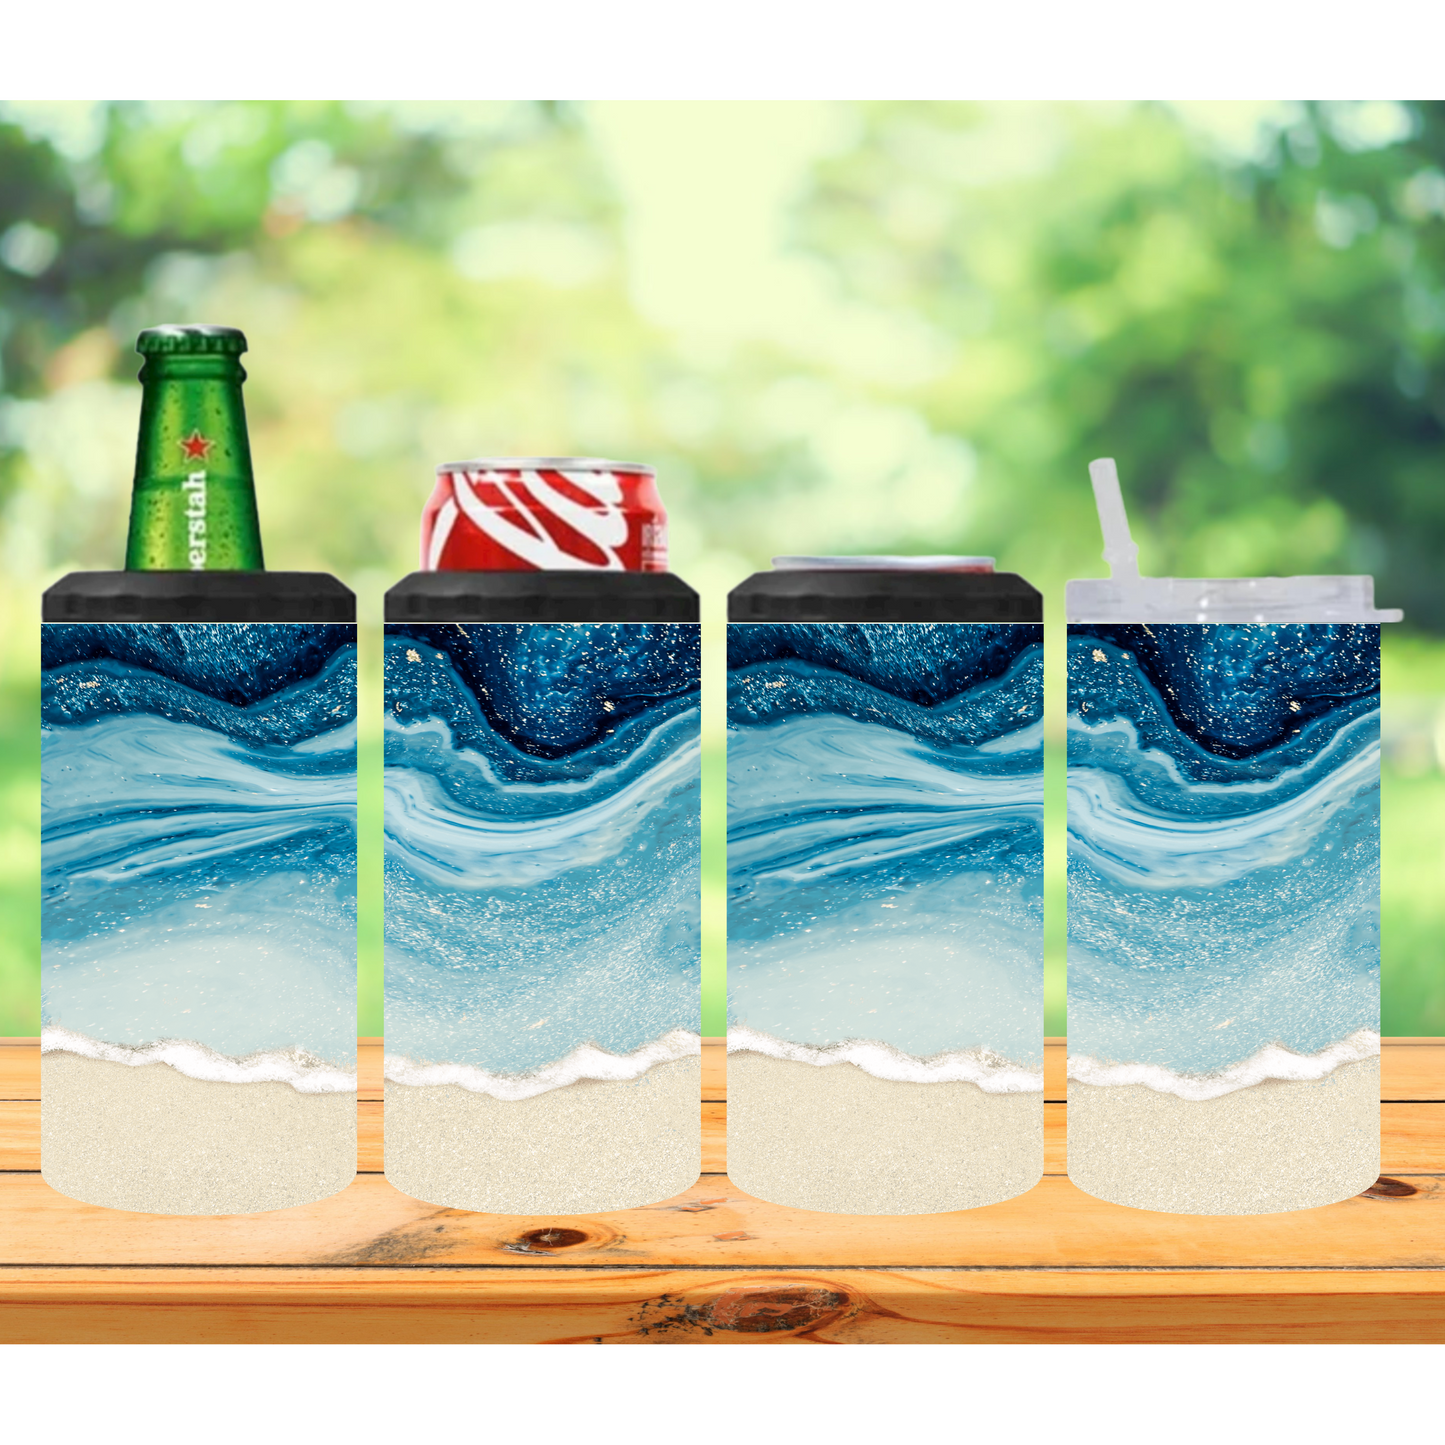 4 in 1 can cooler